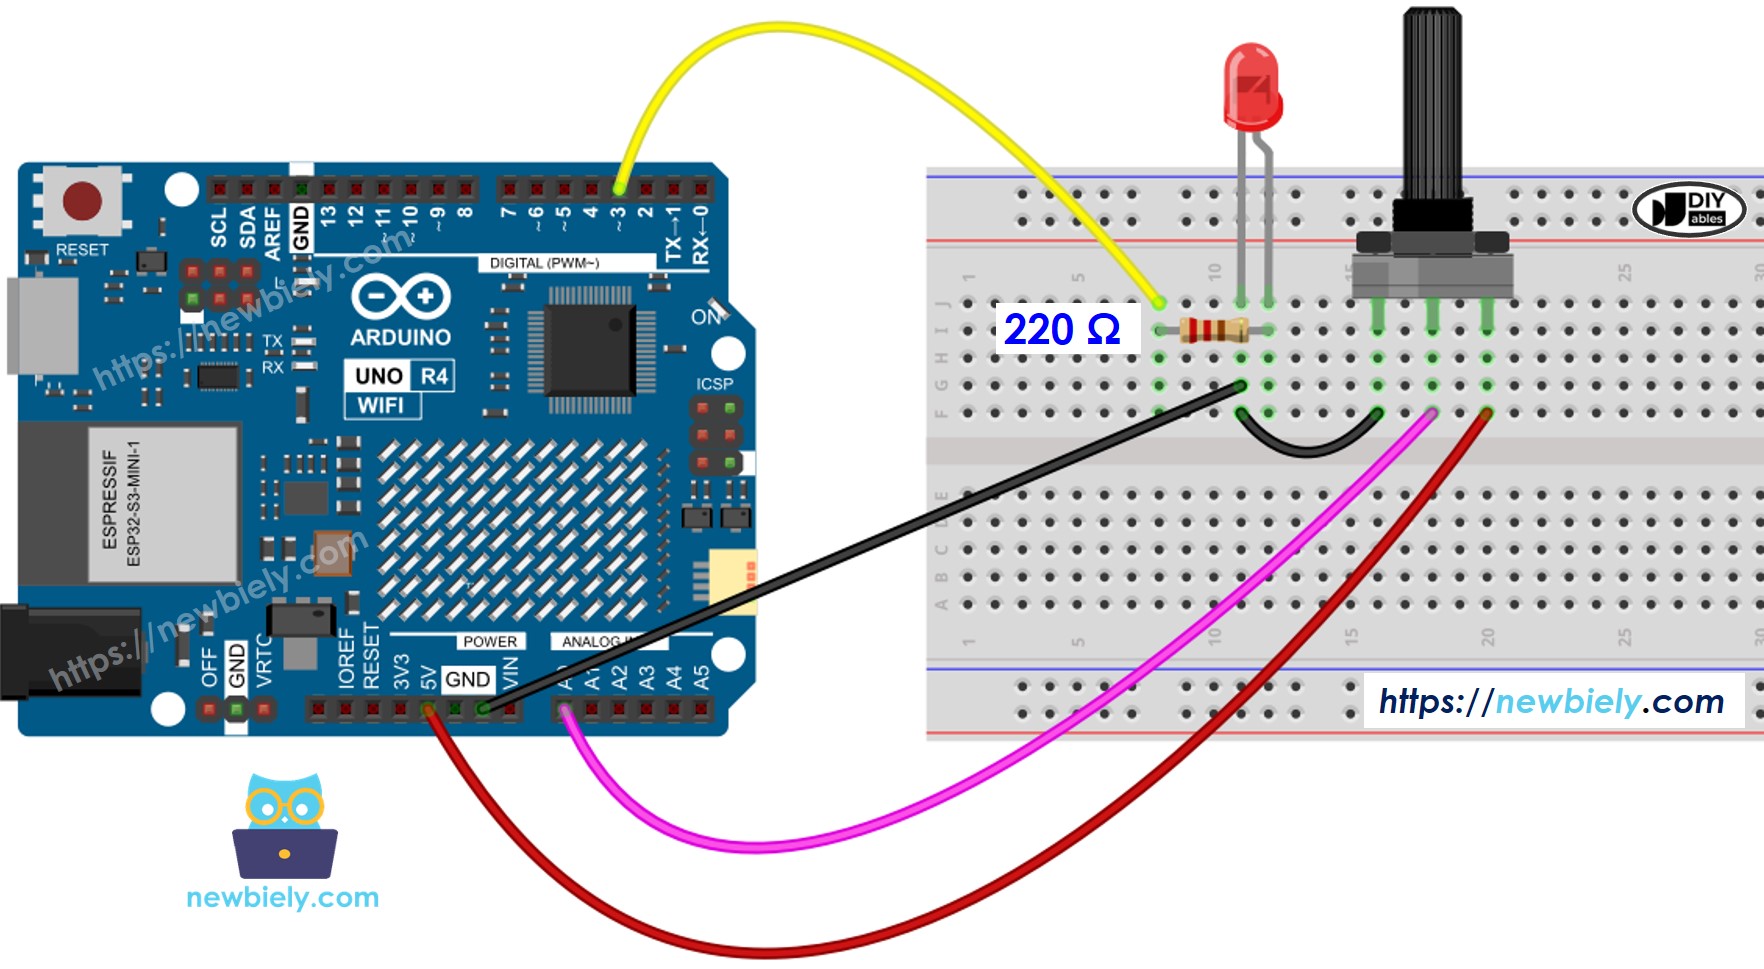 The wiring diagram between Arduino UNO R4 Rotary Potentiometer LED